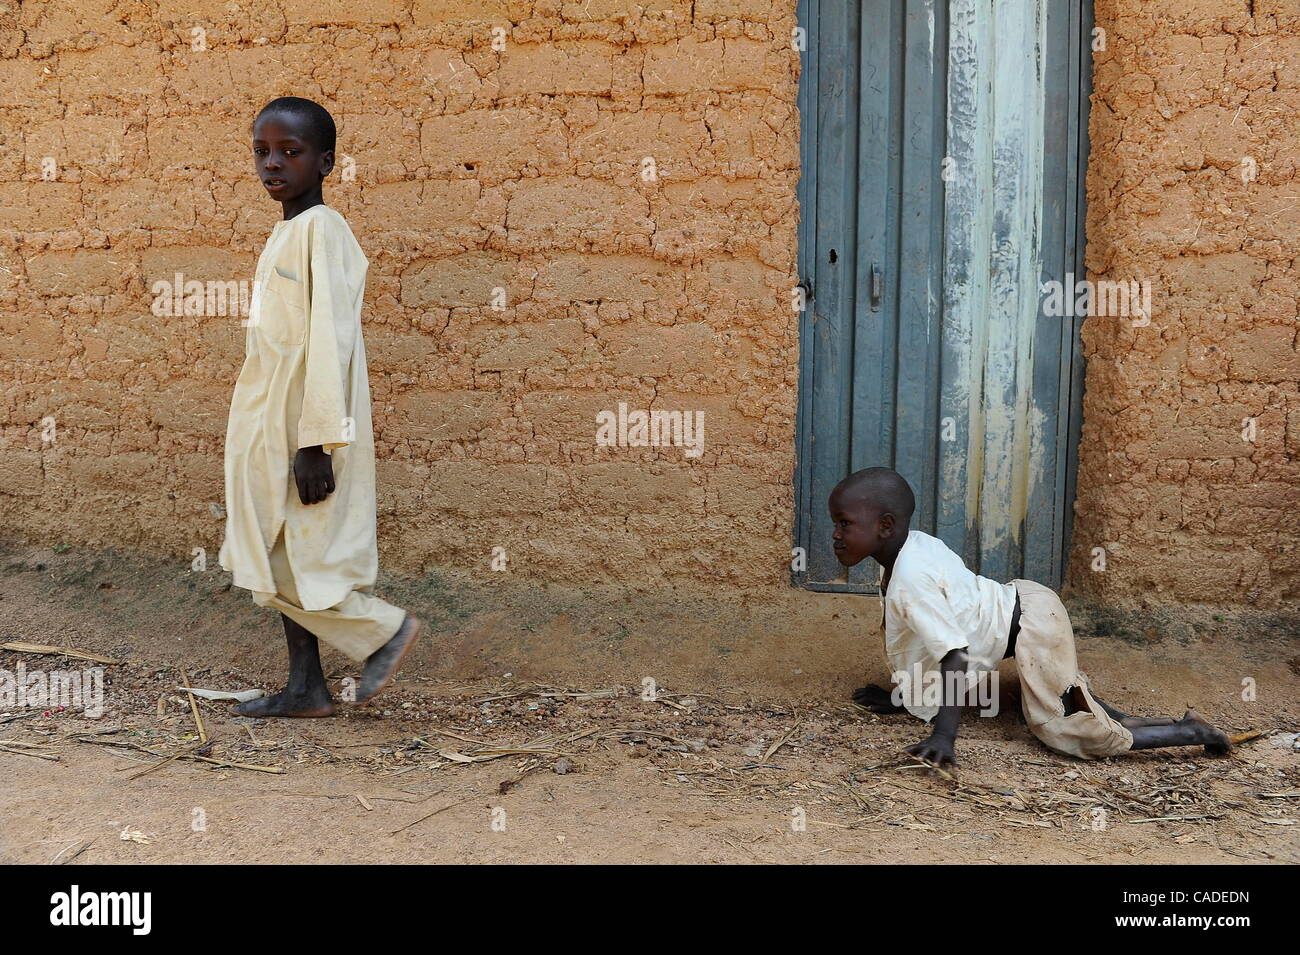 Sept. 20, 2010 - Rimin-Gado, KANO, NIGERIA - Polio victim Abubakar, 6, right, follows a boy in his neighborhood near Kano, Nigeria. Religious zealotry and misinformation have coerced villagers in the Muslim north of Nigeria into refusing polio vaccinations and led to the reemergence of polio only a  Stock Photo